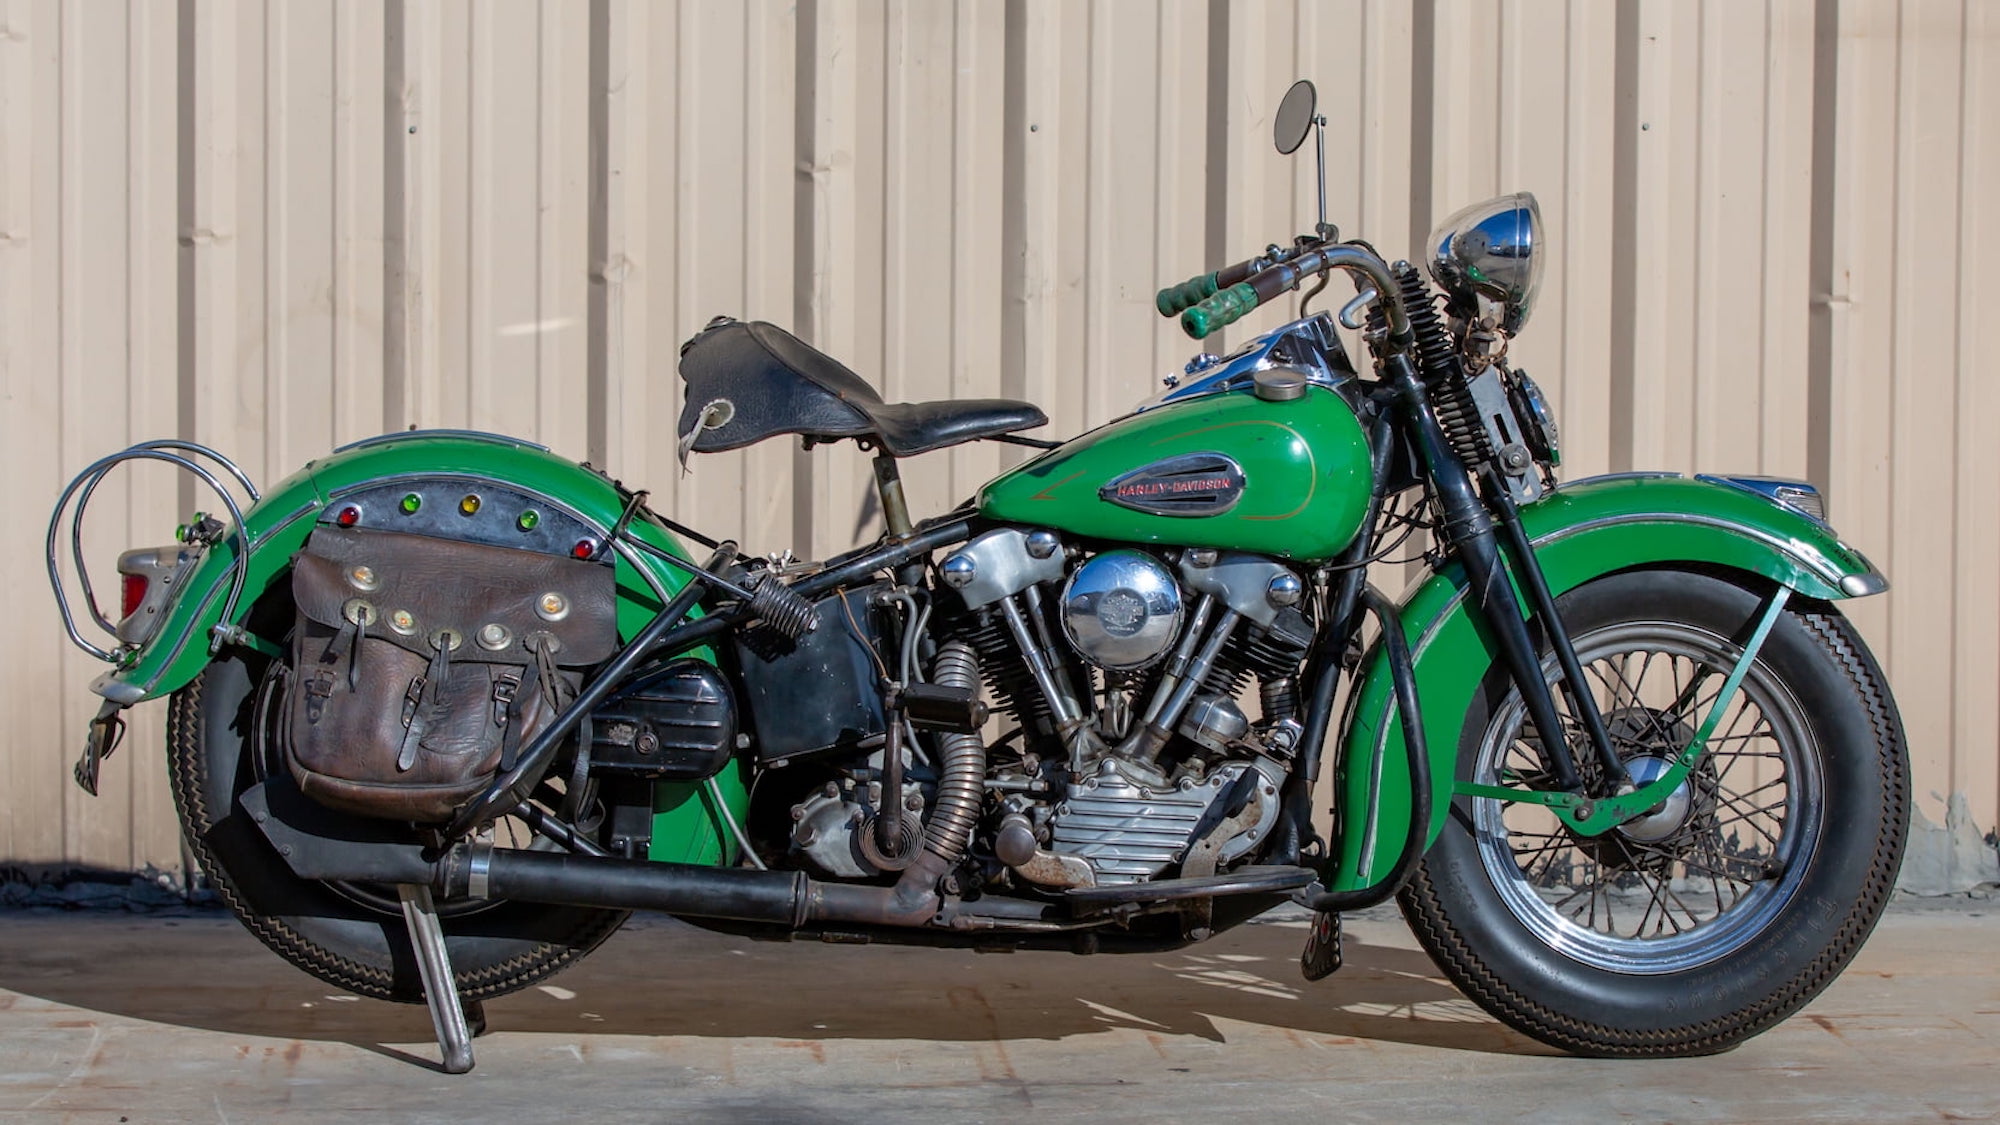 The Harley-Davidson Knucklehead in all her glory. Media sourced from Mecum auctions.